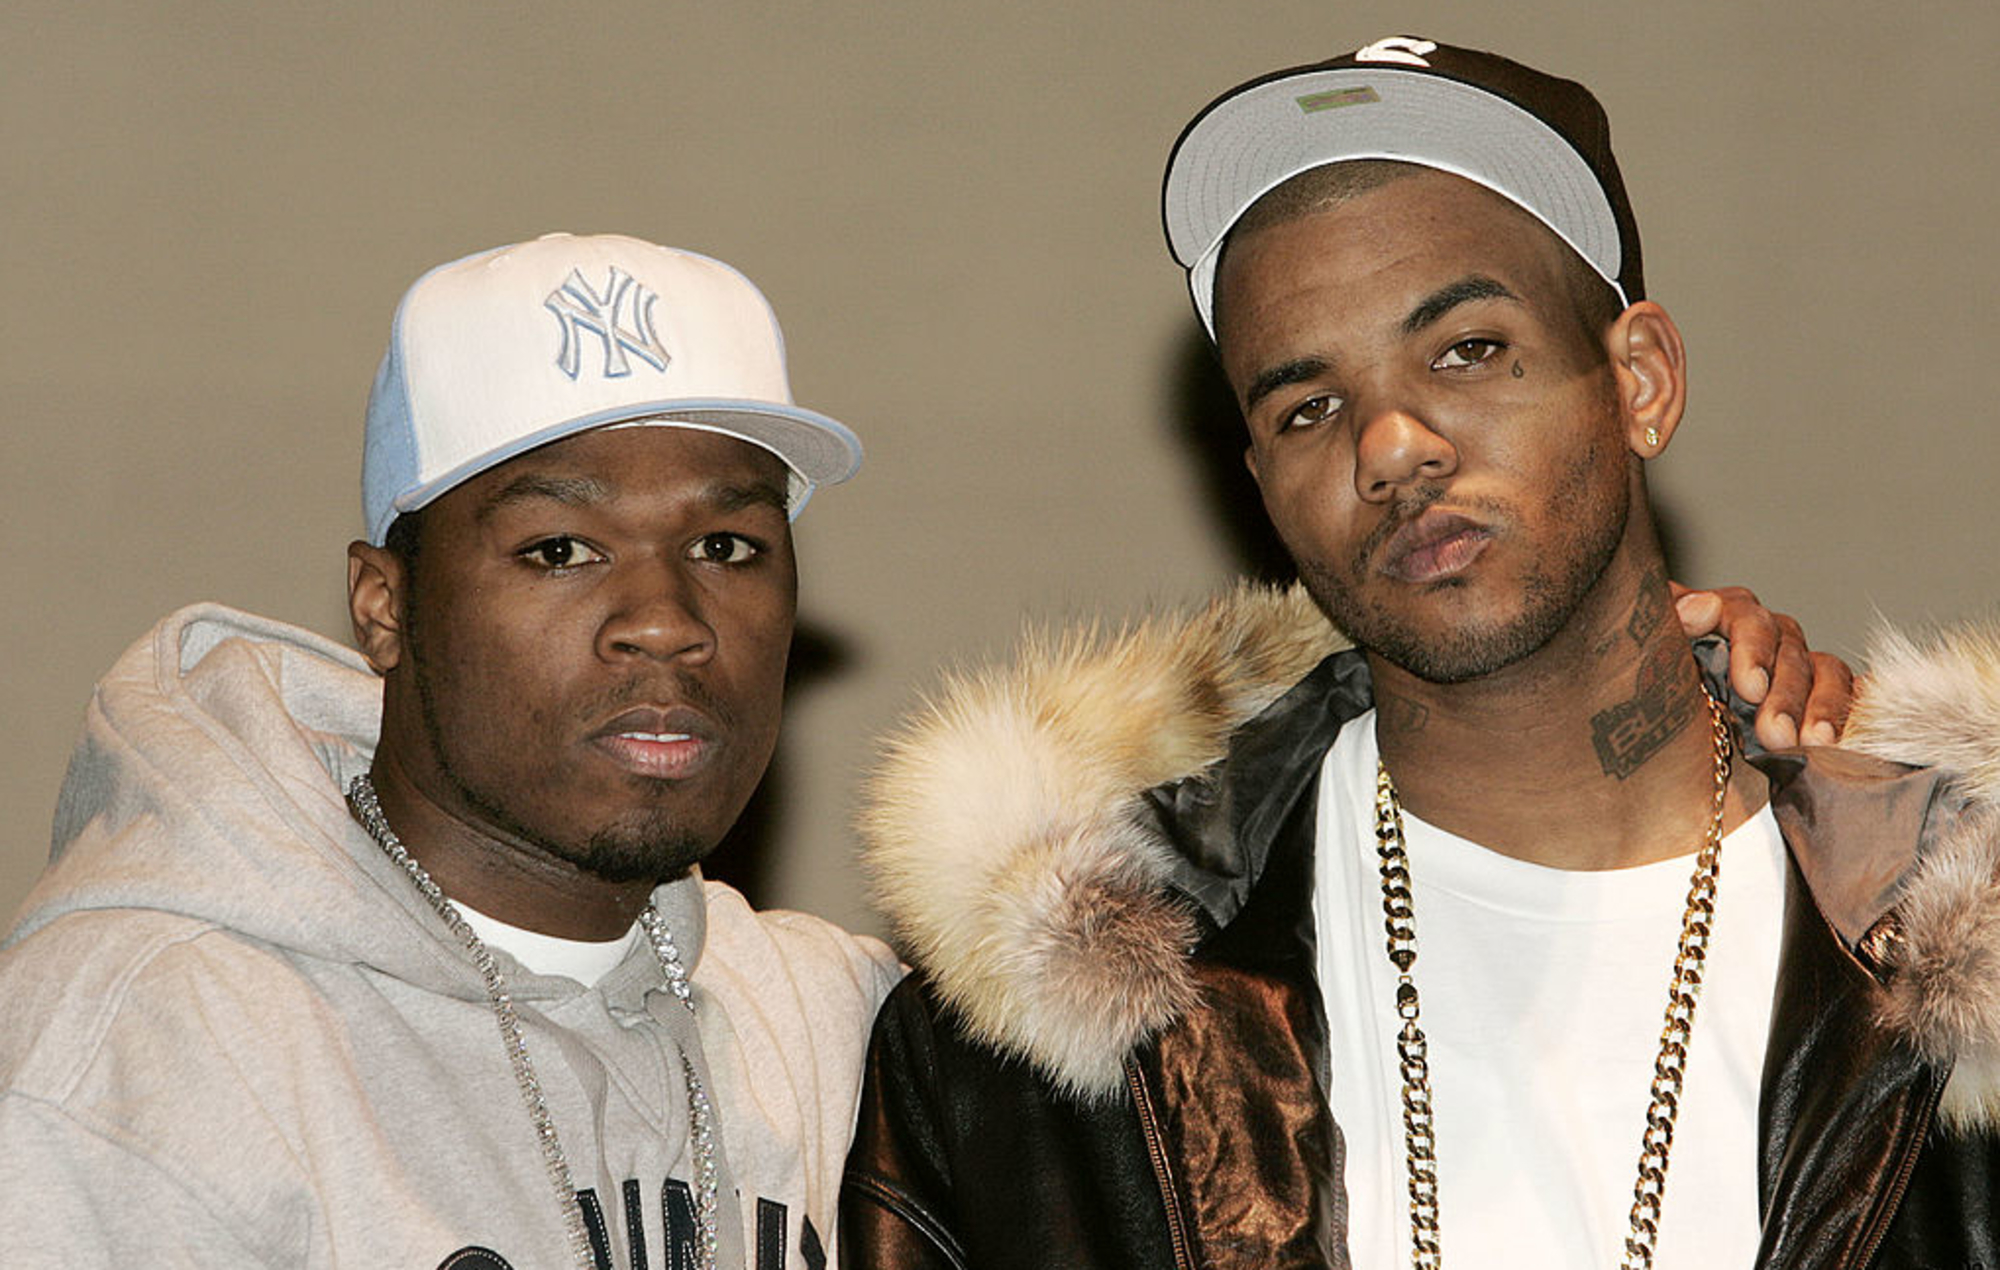 50 Cent’s Beef with The Game to Become Hip-Hop Anthology Series